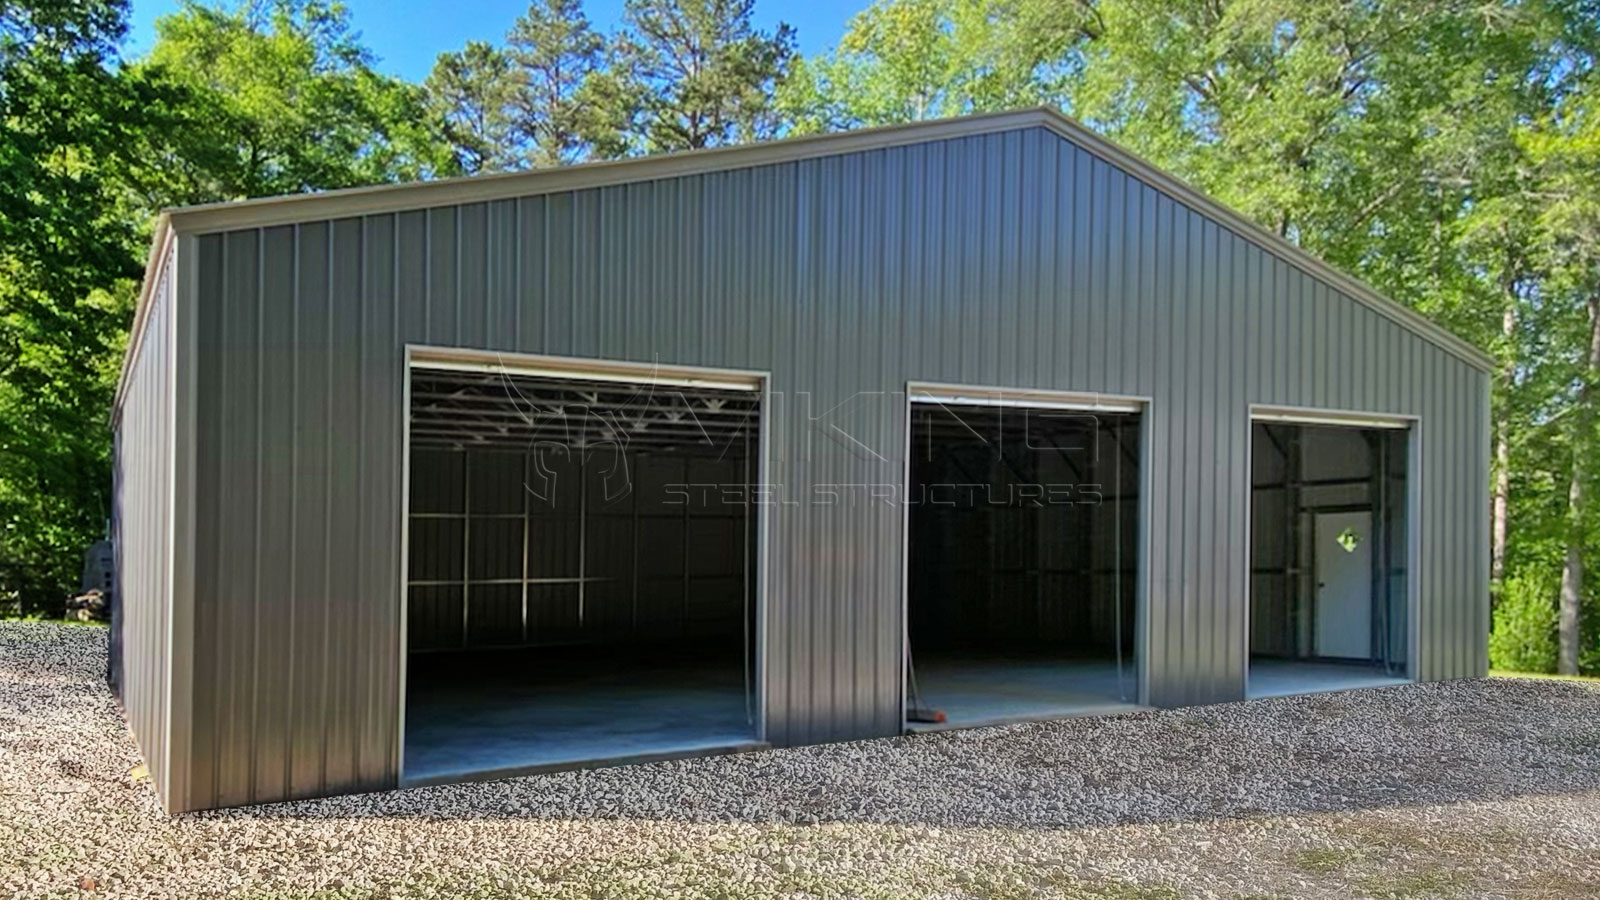 Start Your Restaurant Business on Budget with Metal Buildings